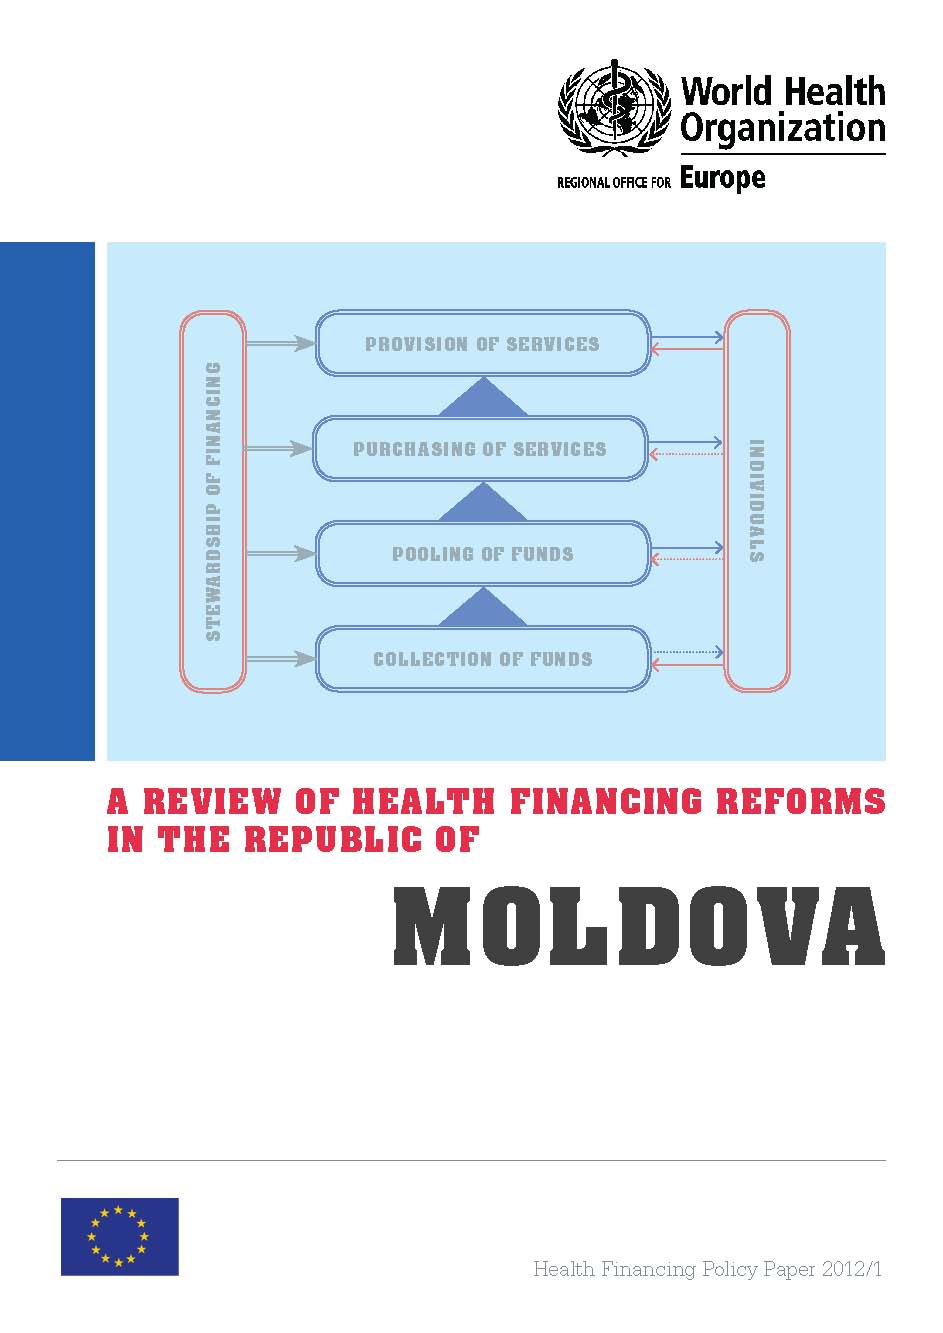 A review of health financing reforms in the Republic of Moldova